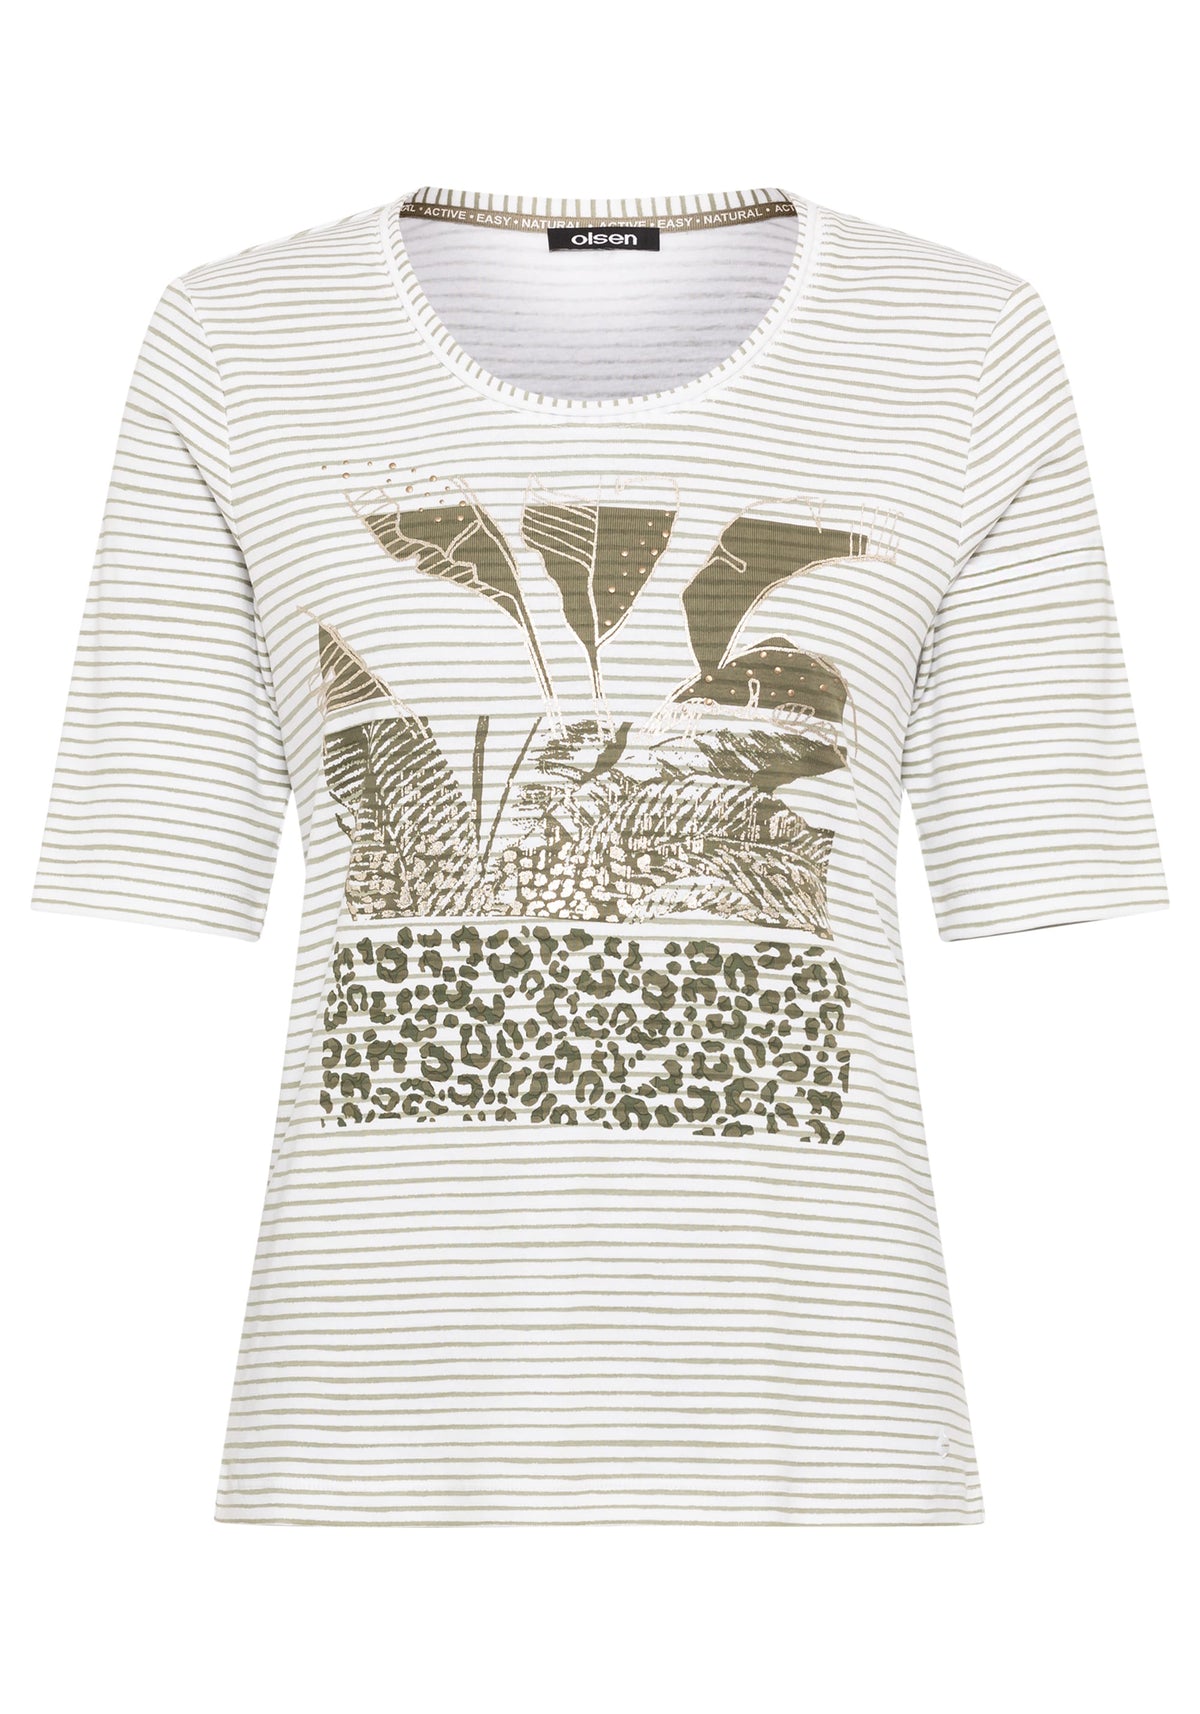 100% Cotton Stripe and Placement Print T-Shirt